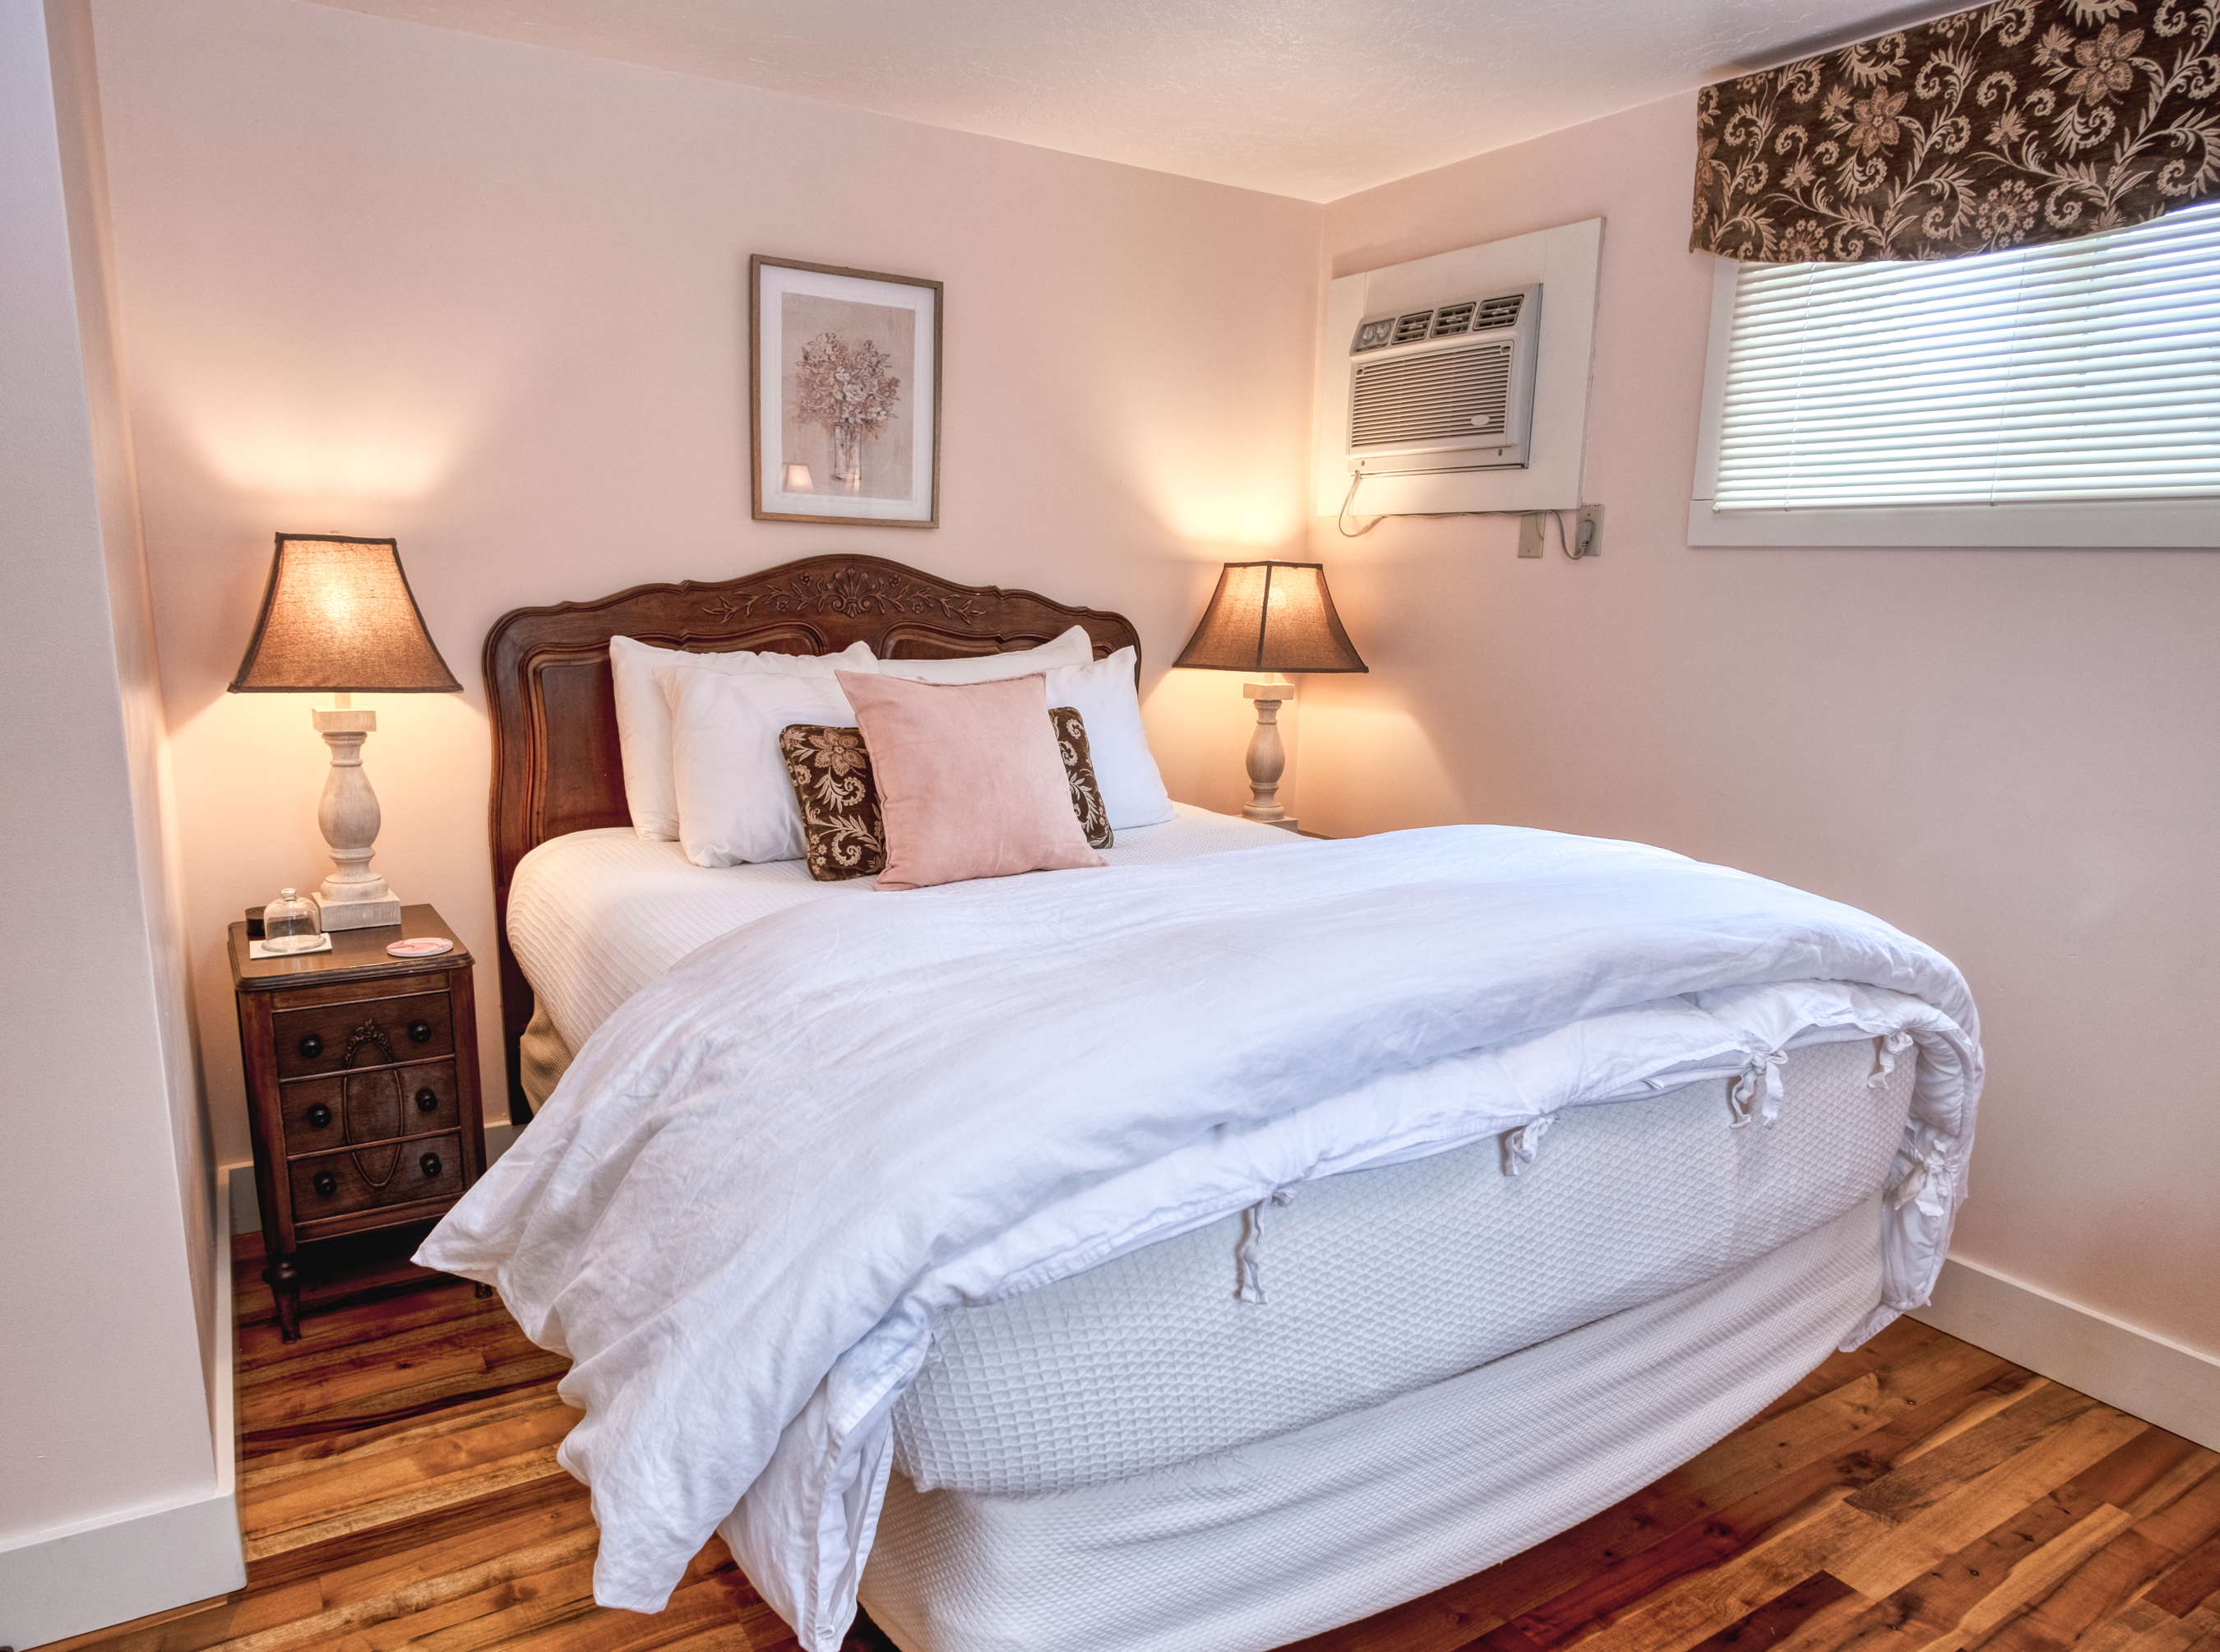 The Almond Room at Country Willows Inn & Estate in Ashland, Oregon has a comfortable queen size bed. The windows in the AlmondRoom overlook the heated pool and gardens.